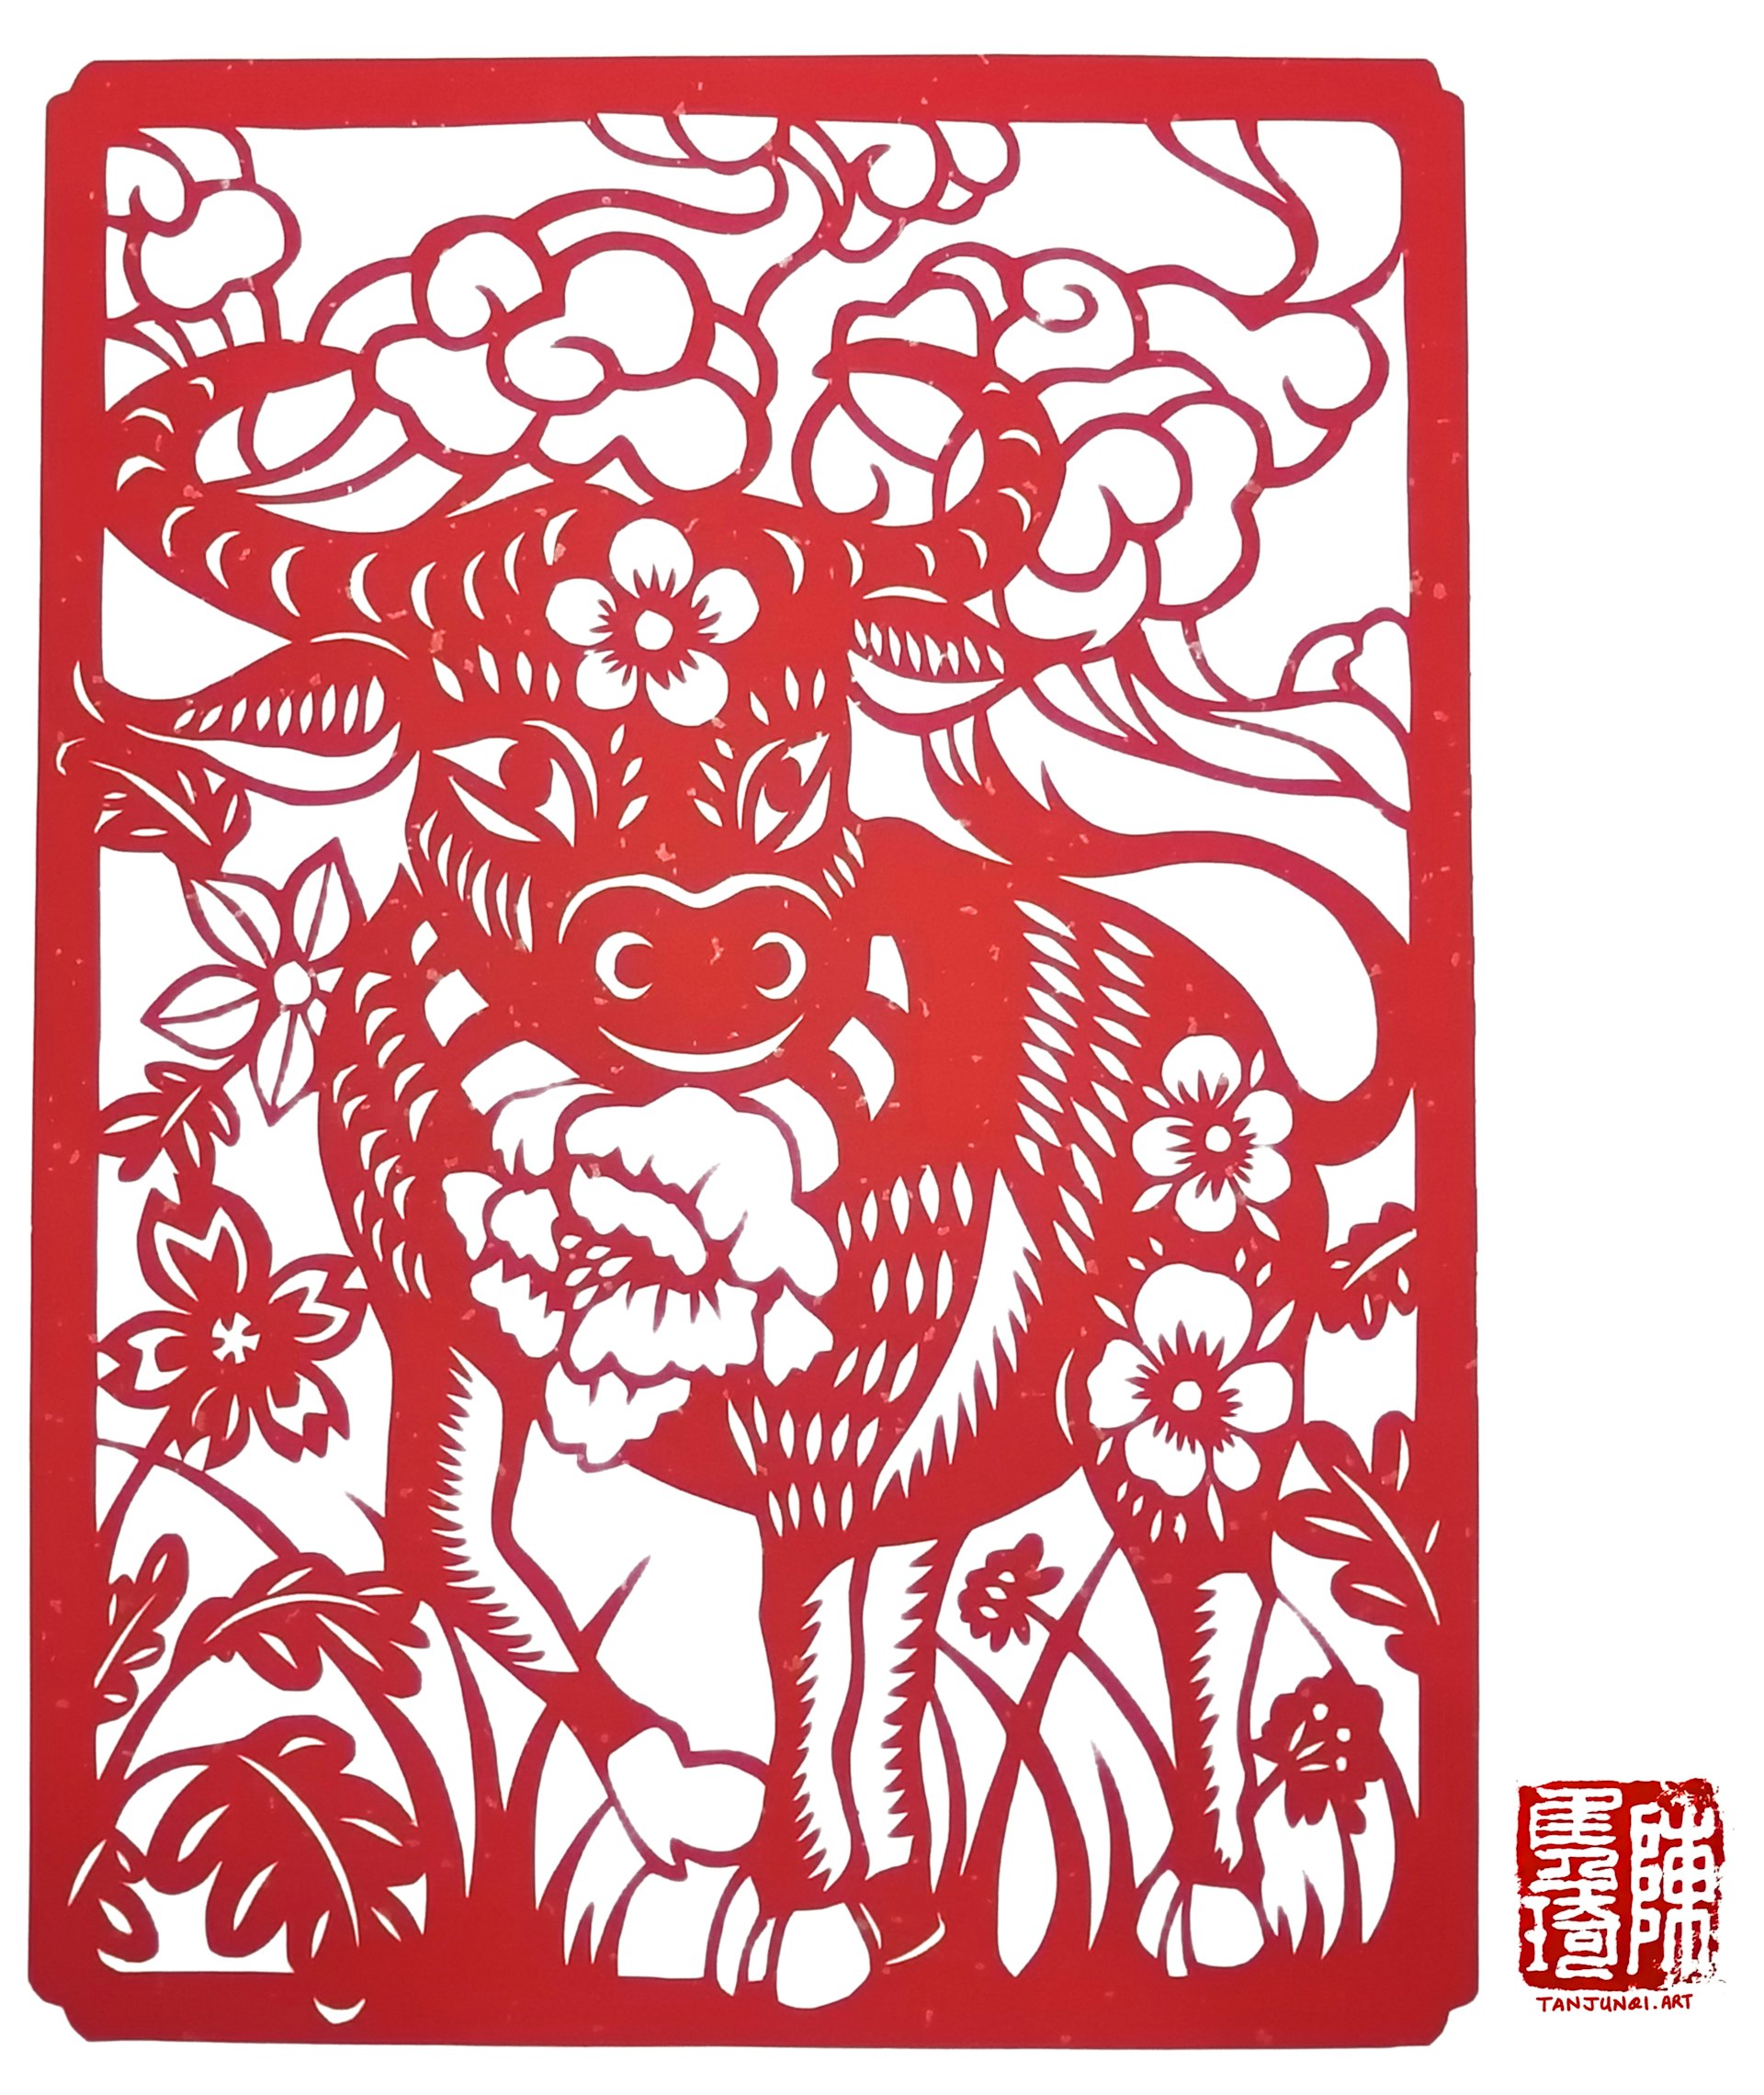 A Chinese papercut within a rectangular frame, showing a bull standing proudly amongst grass and flowers, against a sky filled with lucky clouds.